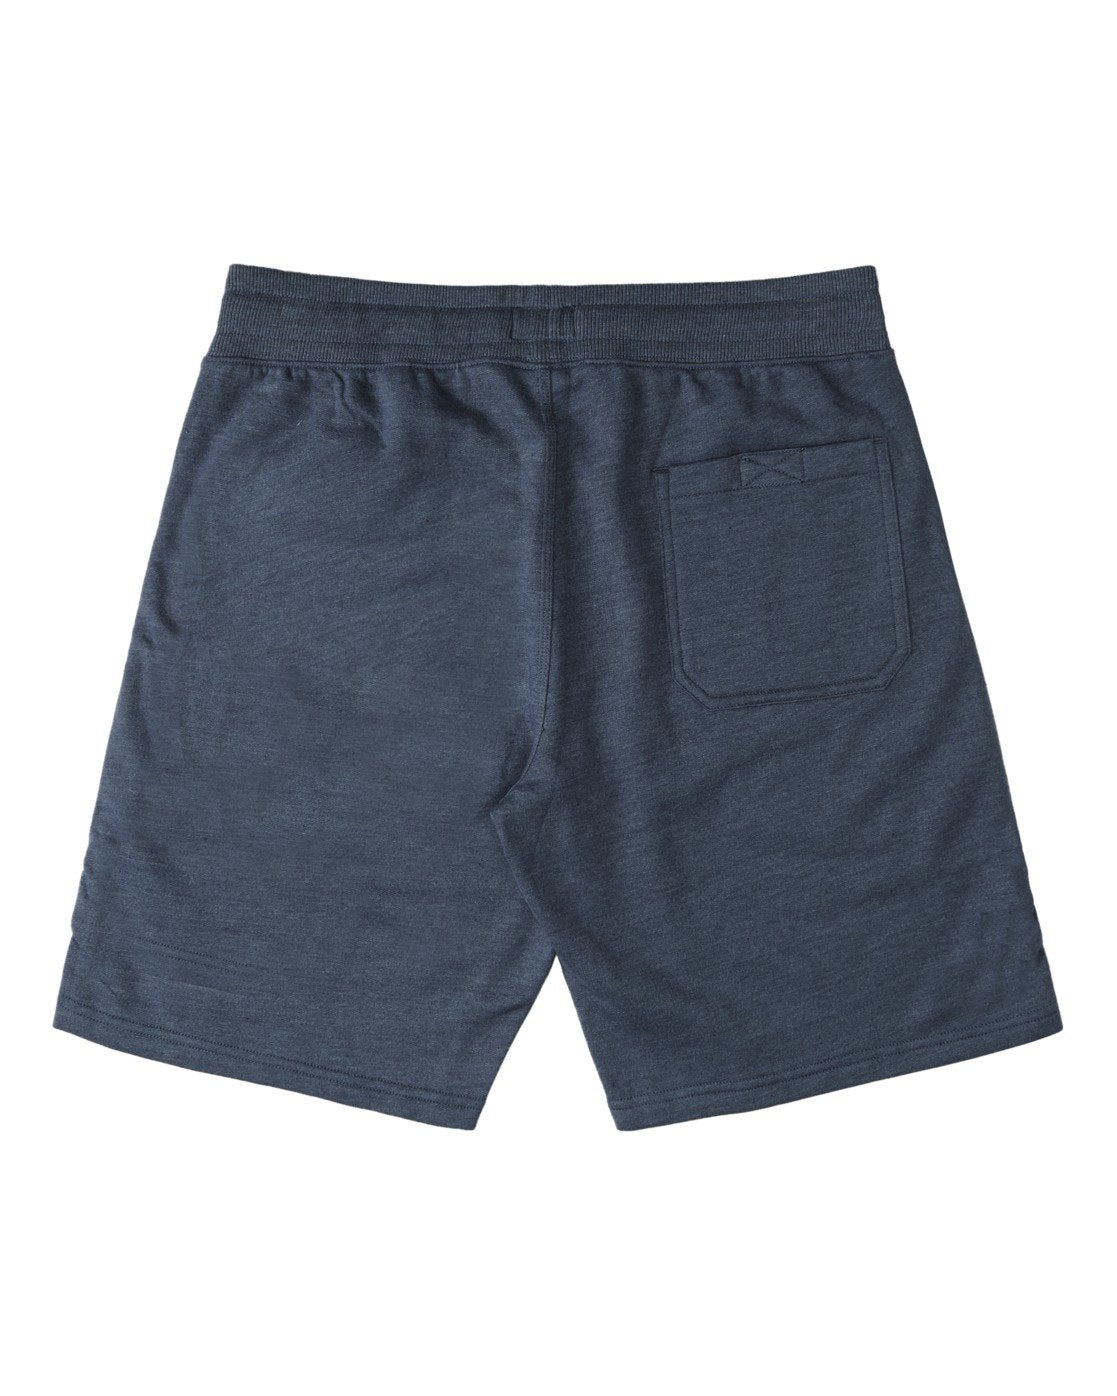 ALL DAY SHORT - M2513BAS